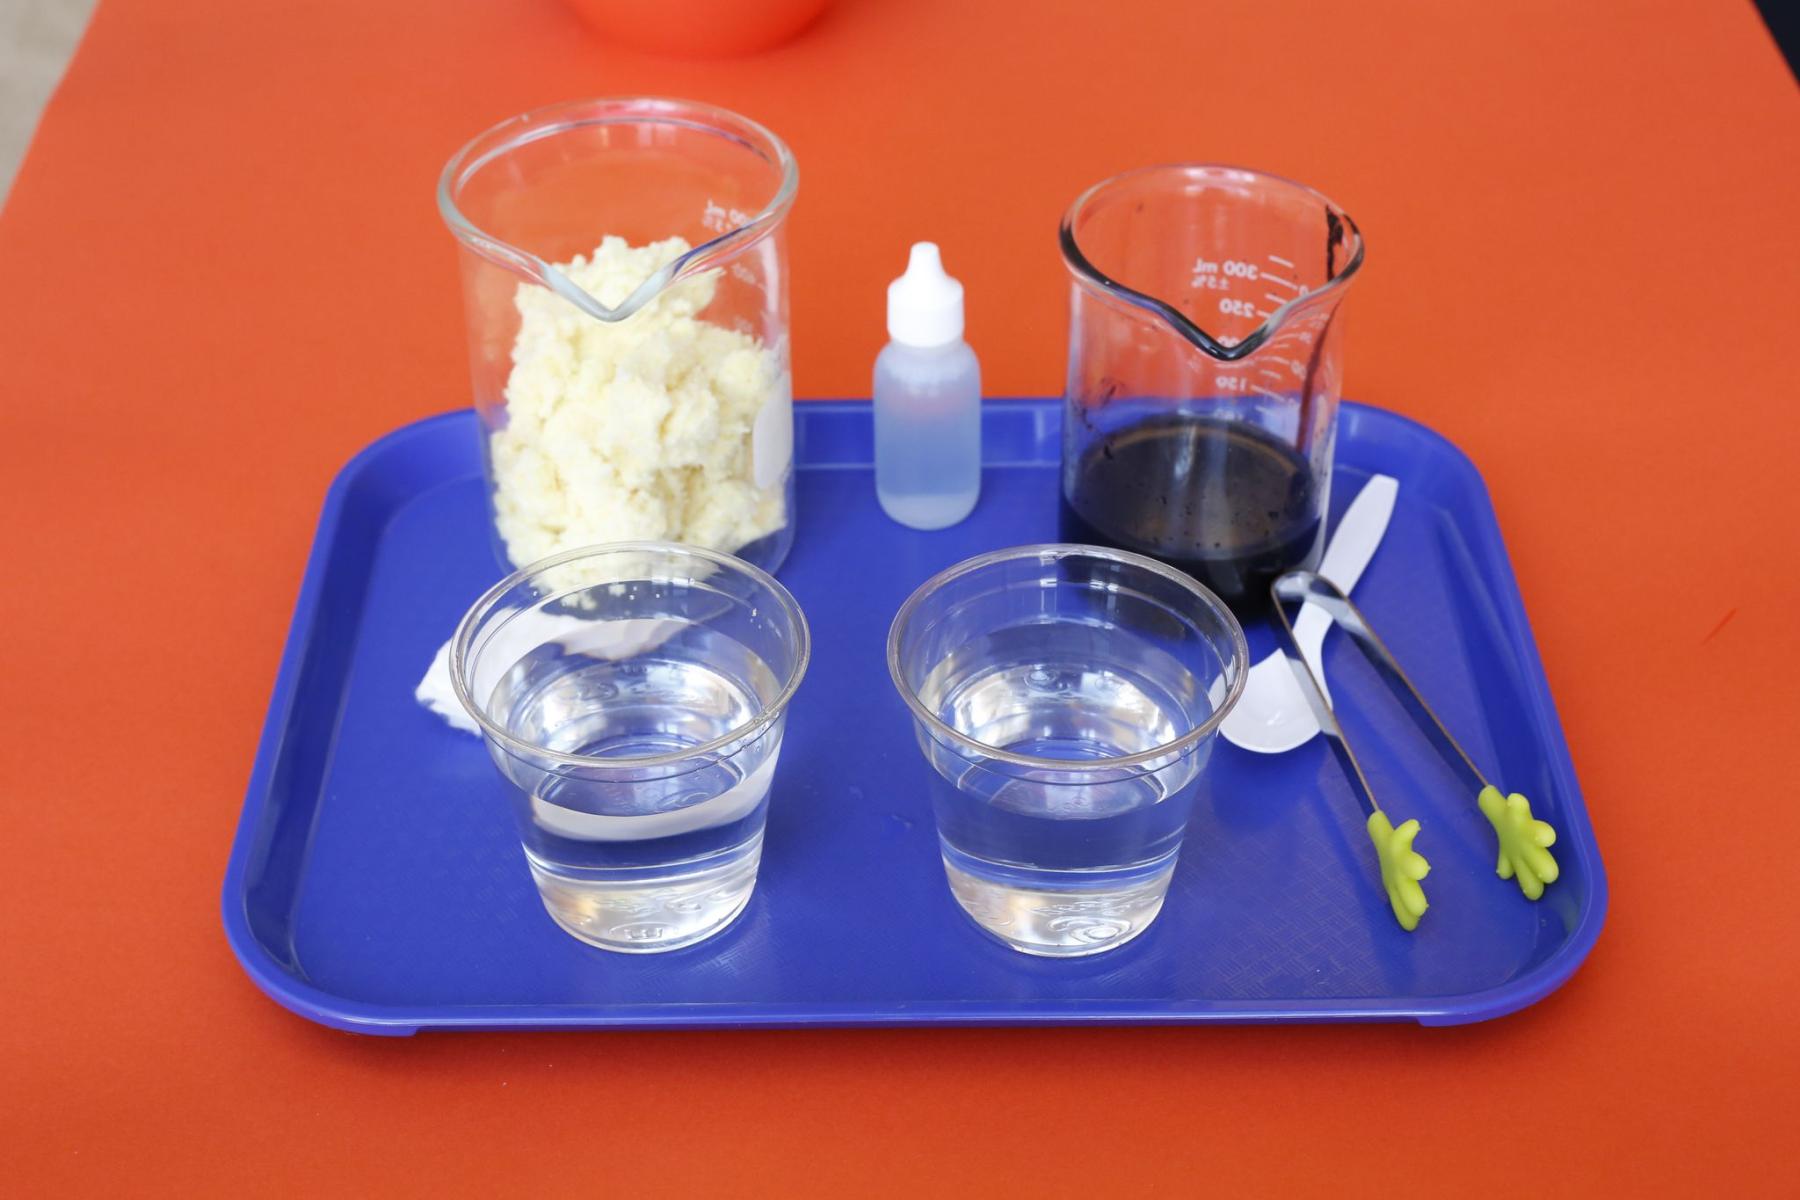 Chemistry oil spill activity materials with dye absorbent cups and tongs